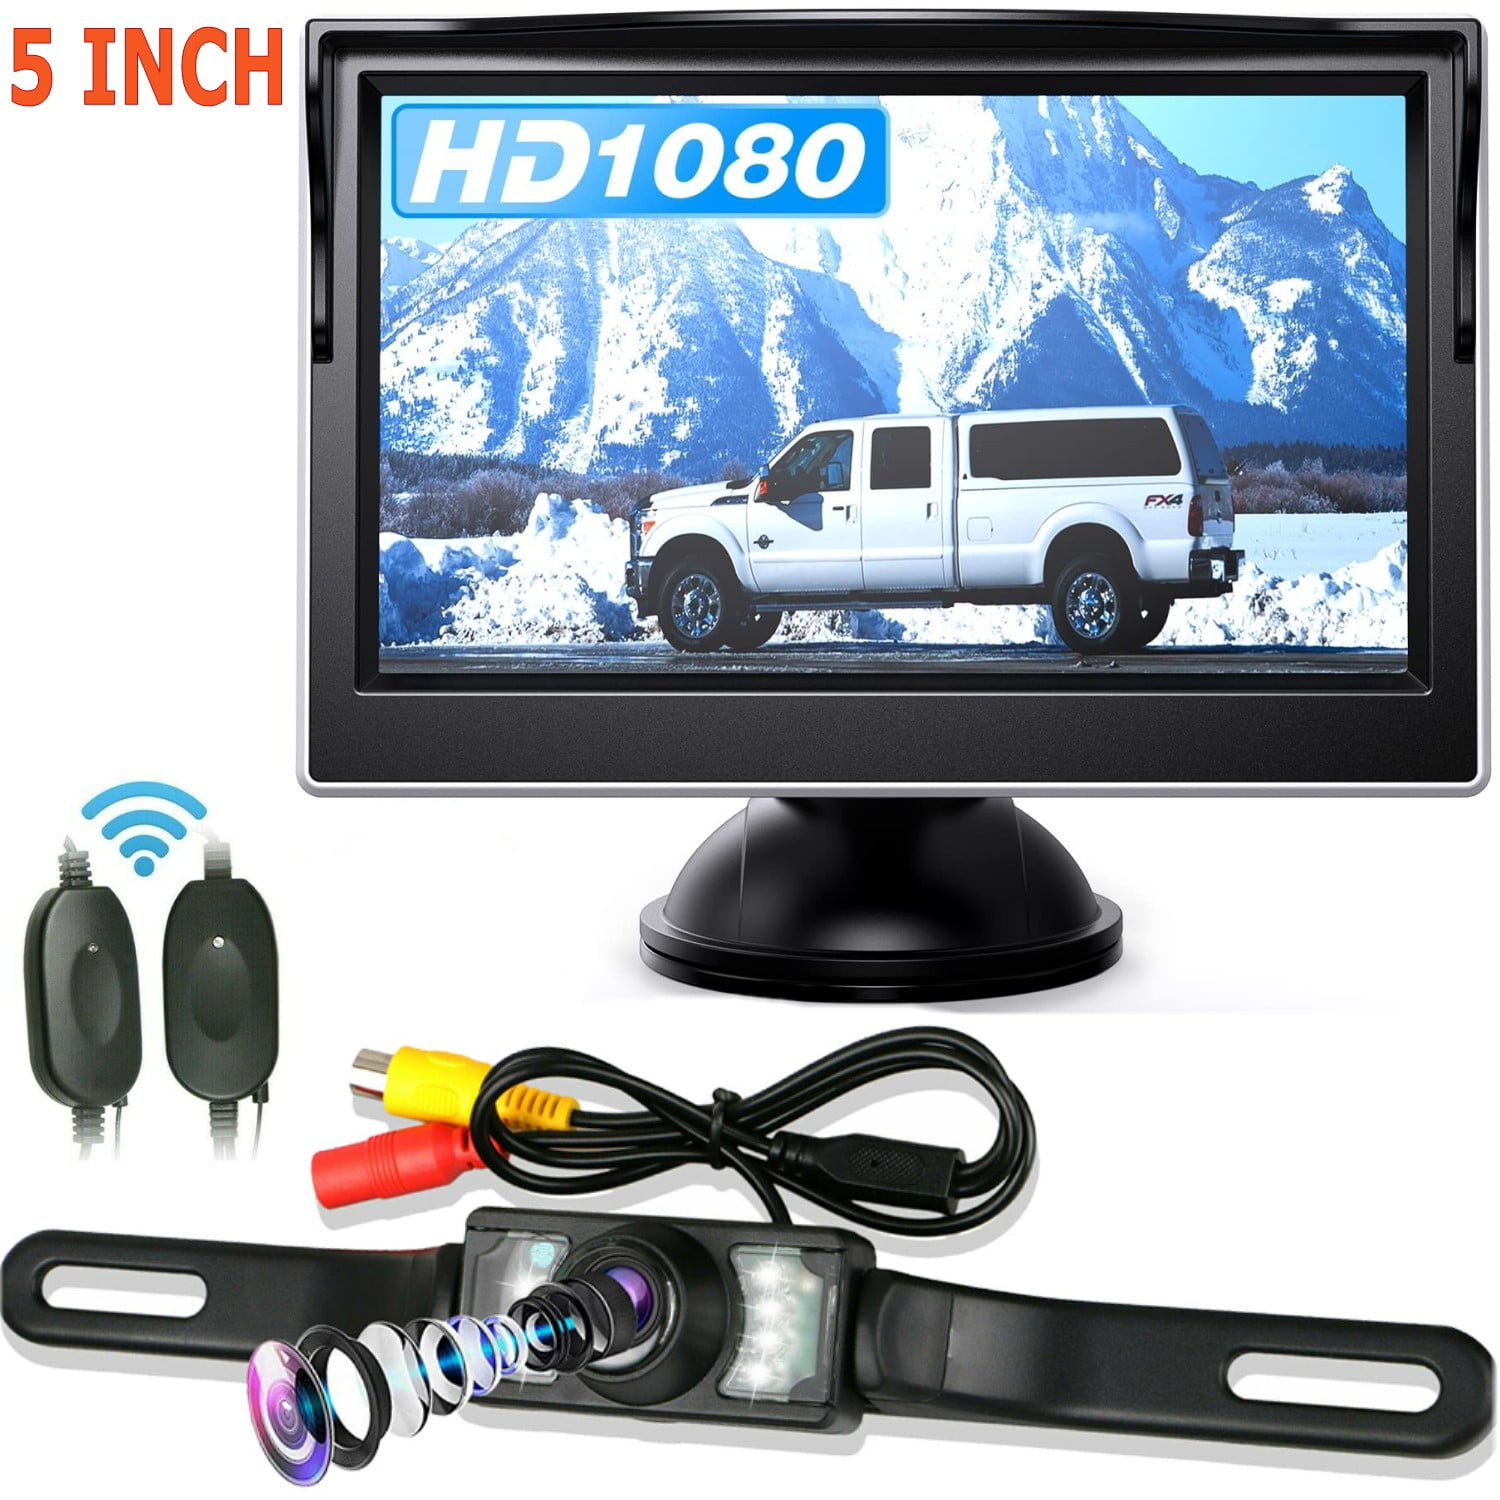 Vehicle Backup Camera and inch Screen Monitor Kit   IR Night Vision Reverse Rear View Parking Camera System with Pin 15m Cable for Bus RV Truck Tr - 3